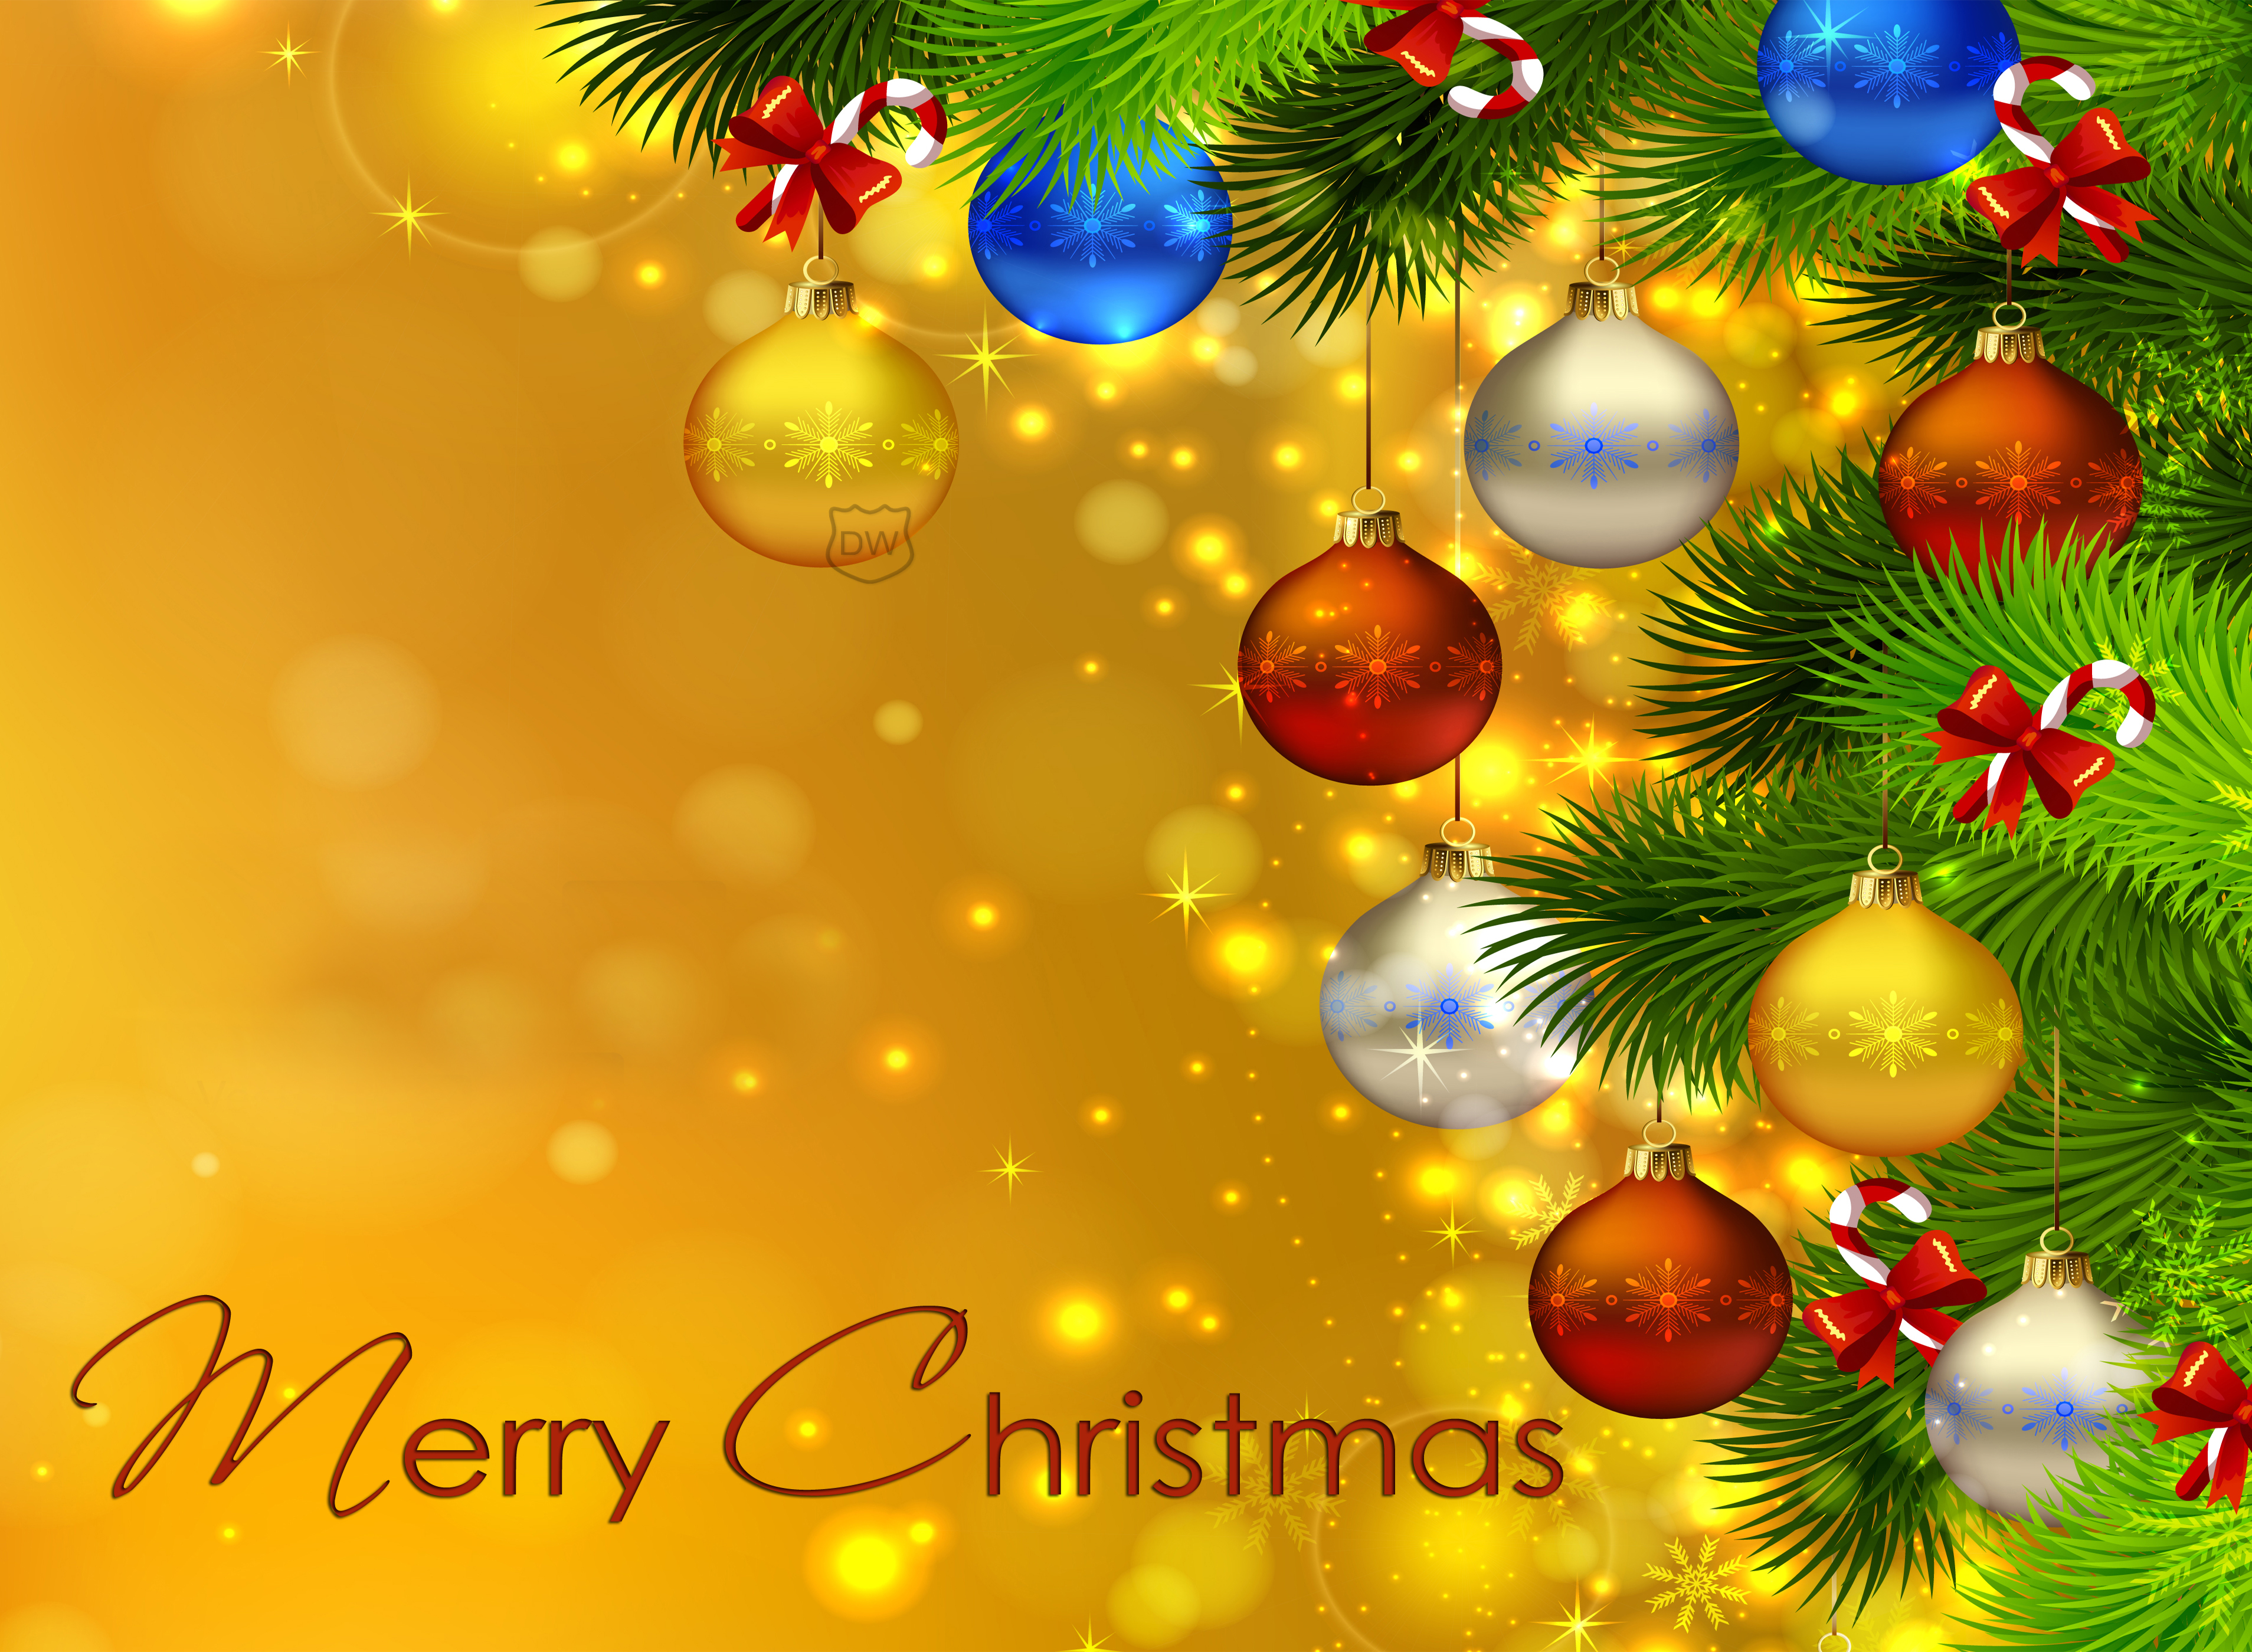 Christmas Wallpapers 2017 | Best Wallpapers